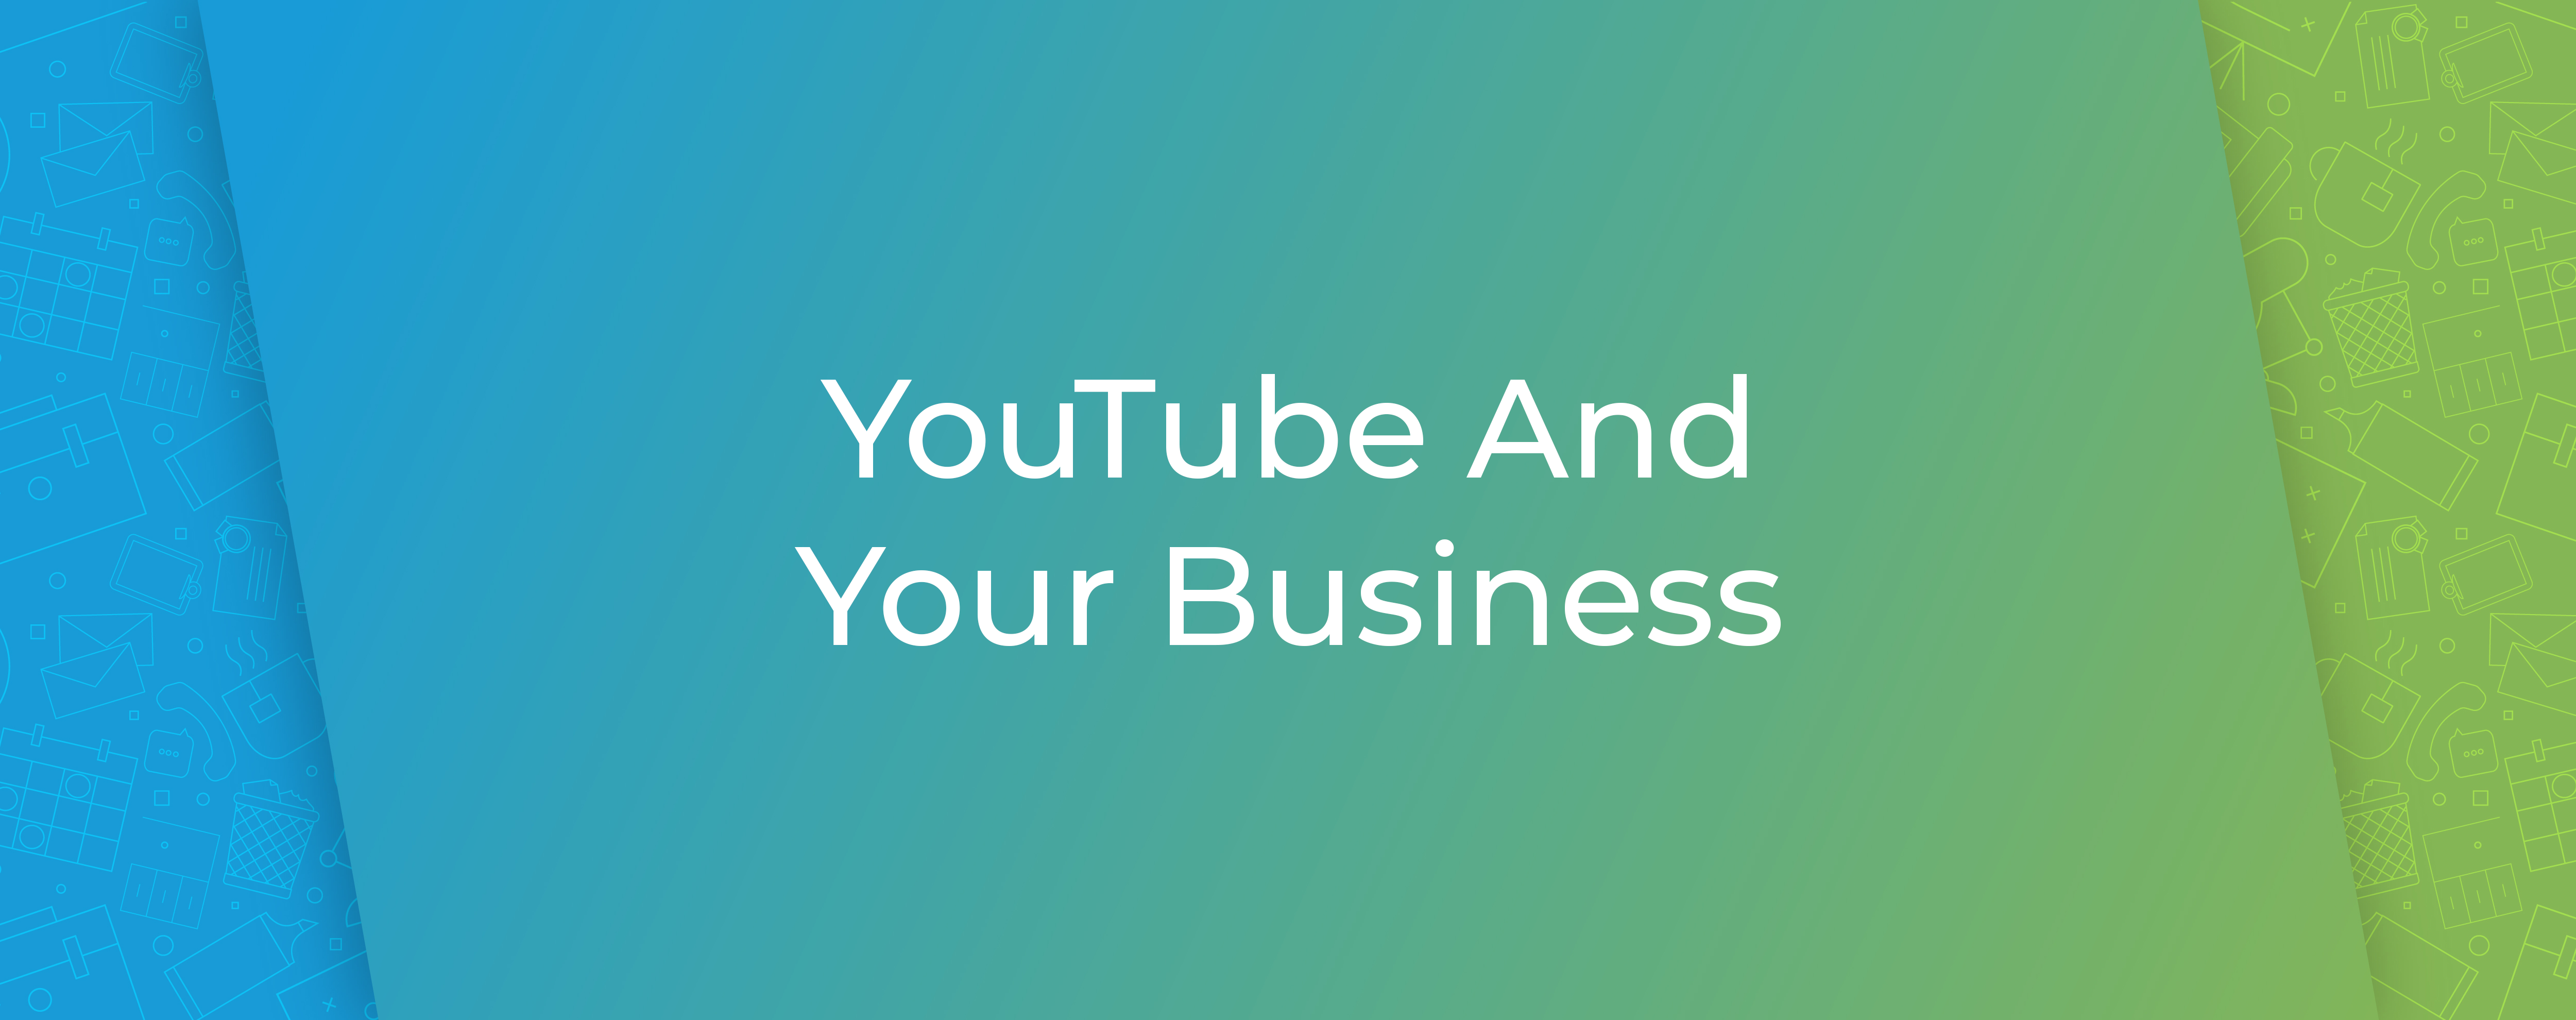 YouTube And Your Business